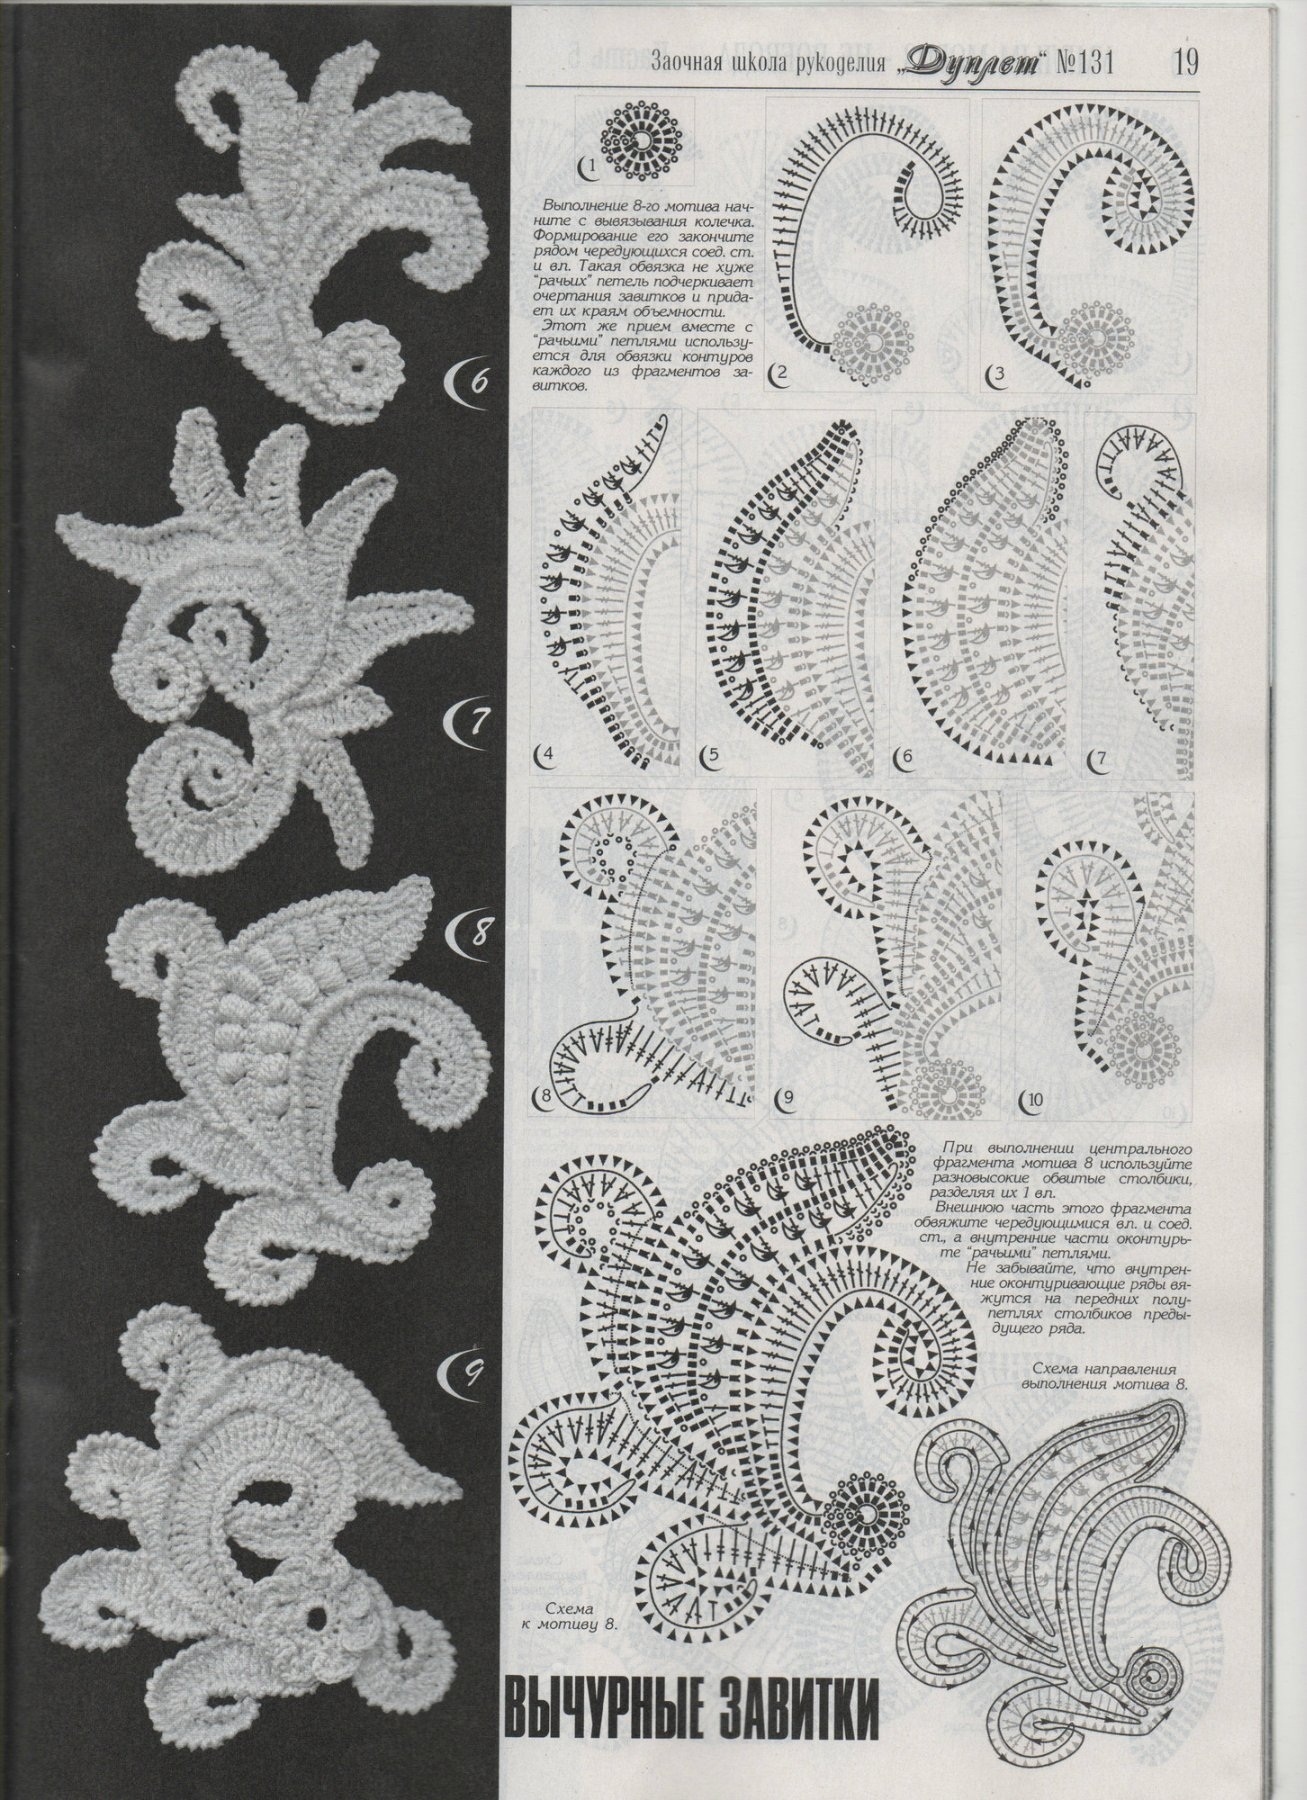 Schemes of Irish lace elements connected, option 14